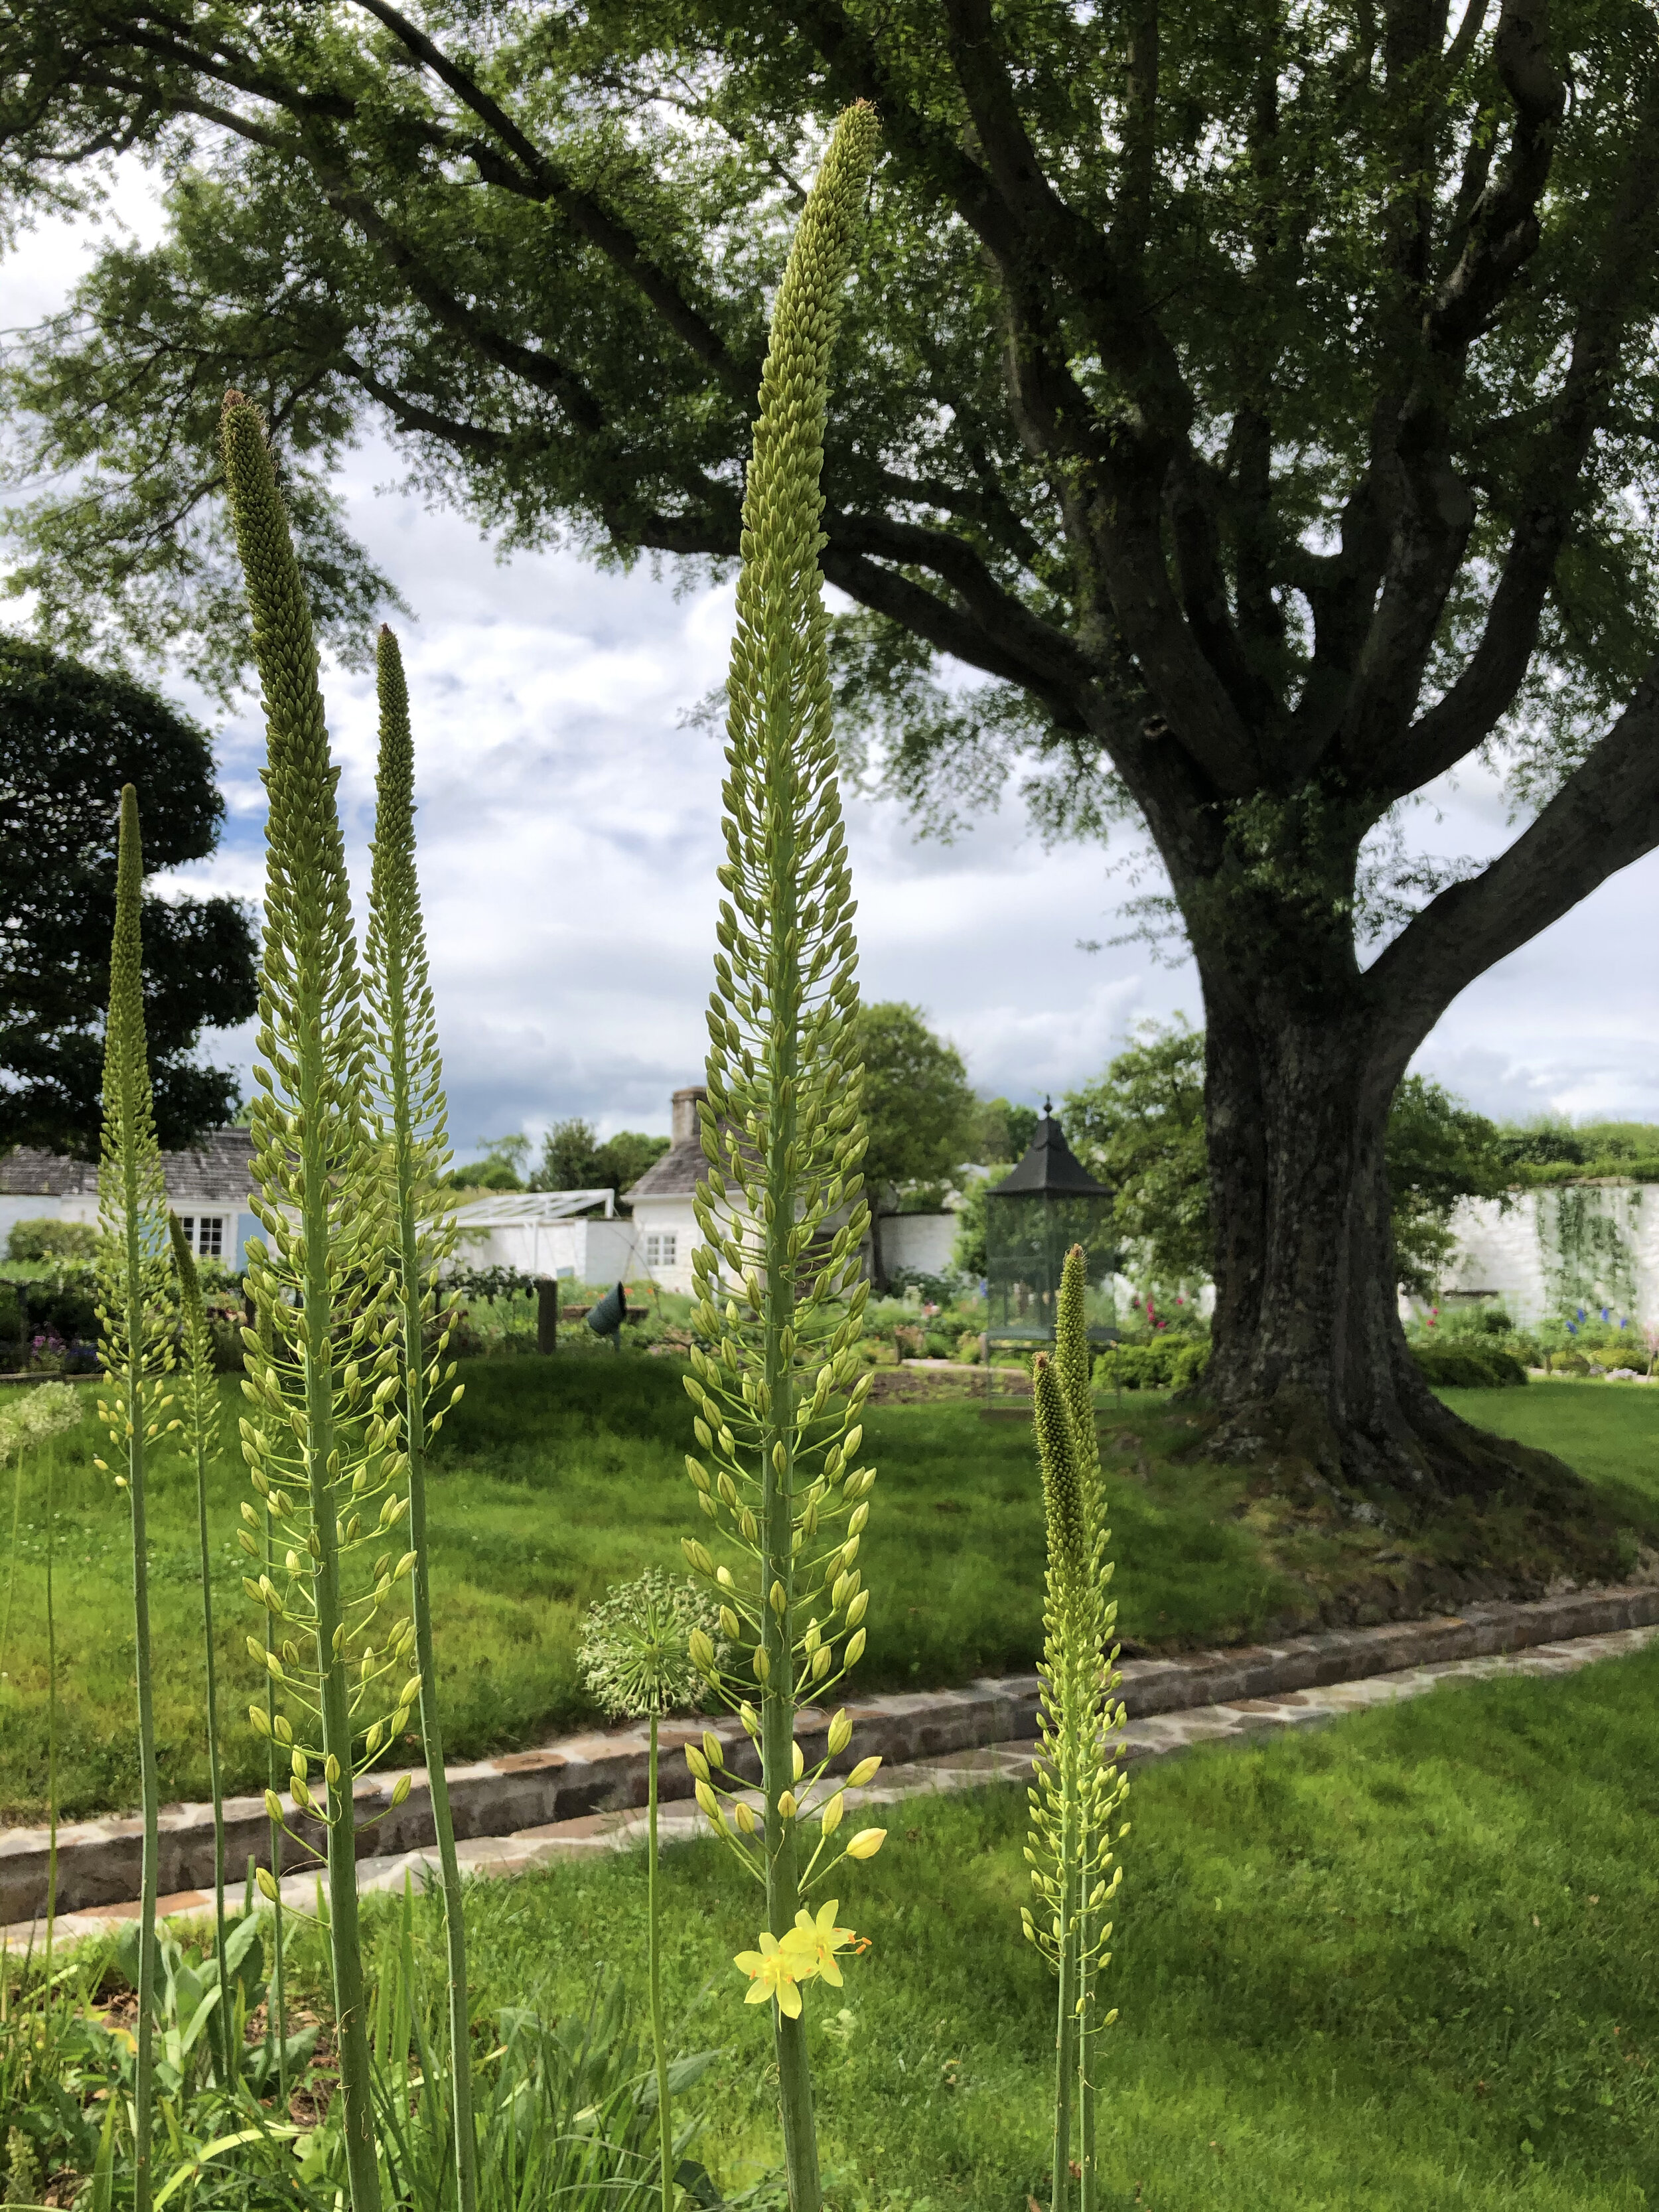  The yellow, star-shaped flowers on these foxtails in the pollinator garden are just beginning to bloom. Soon, each flower will be covered in tiny flowers, attracting many beneficial bees and insects.    